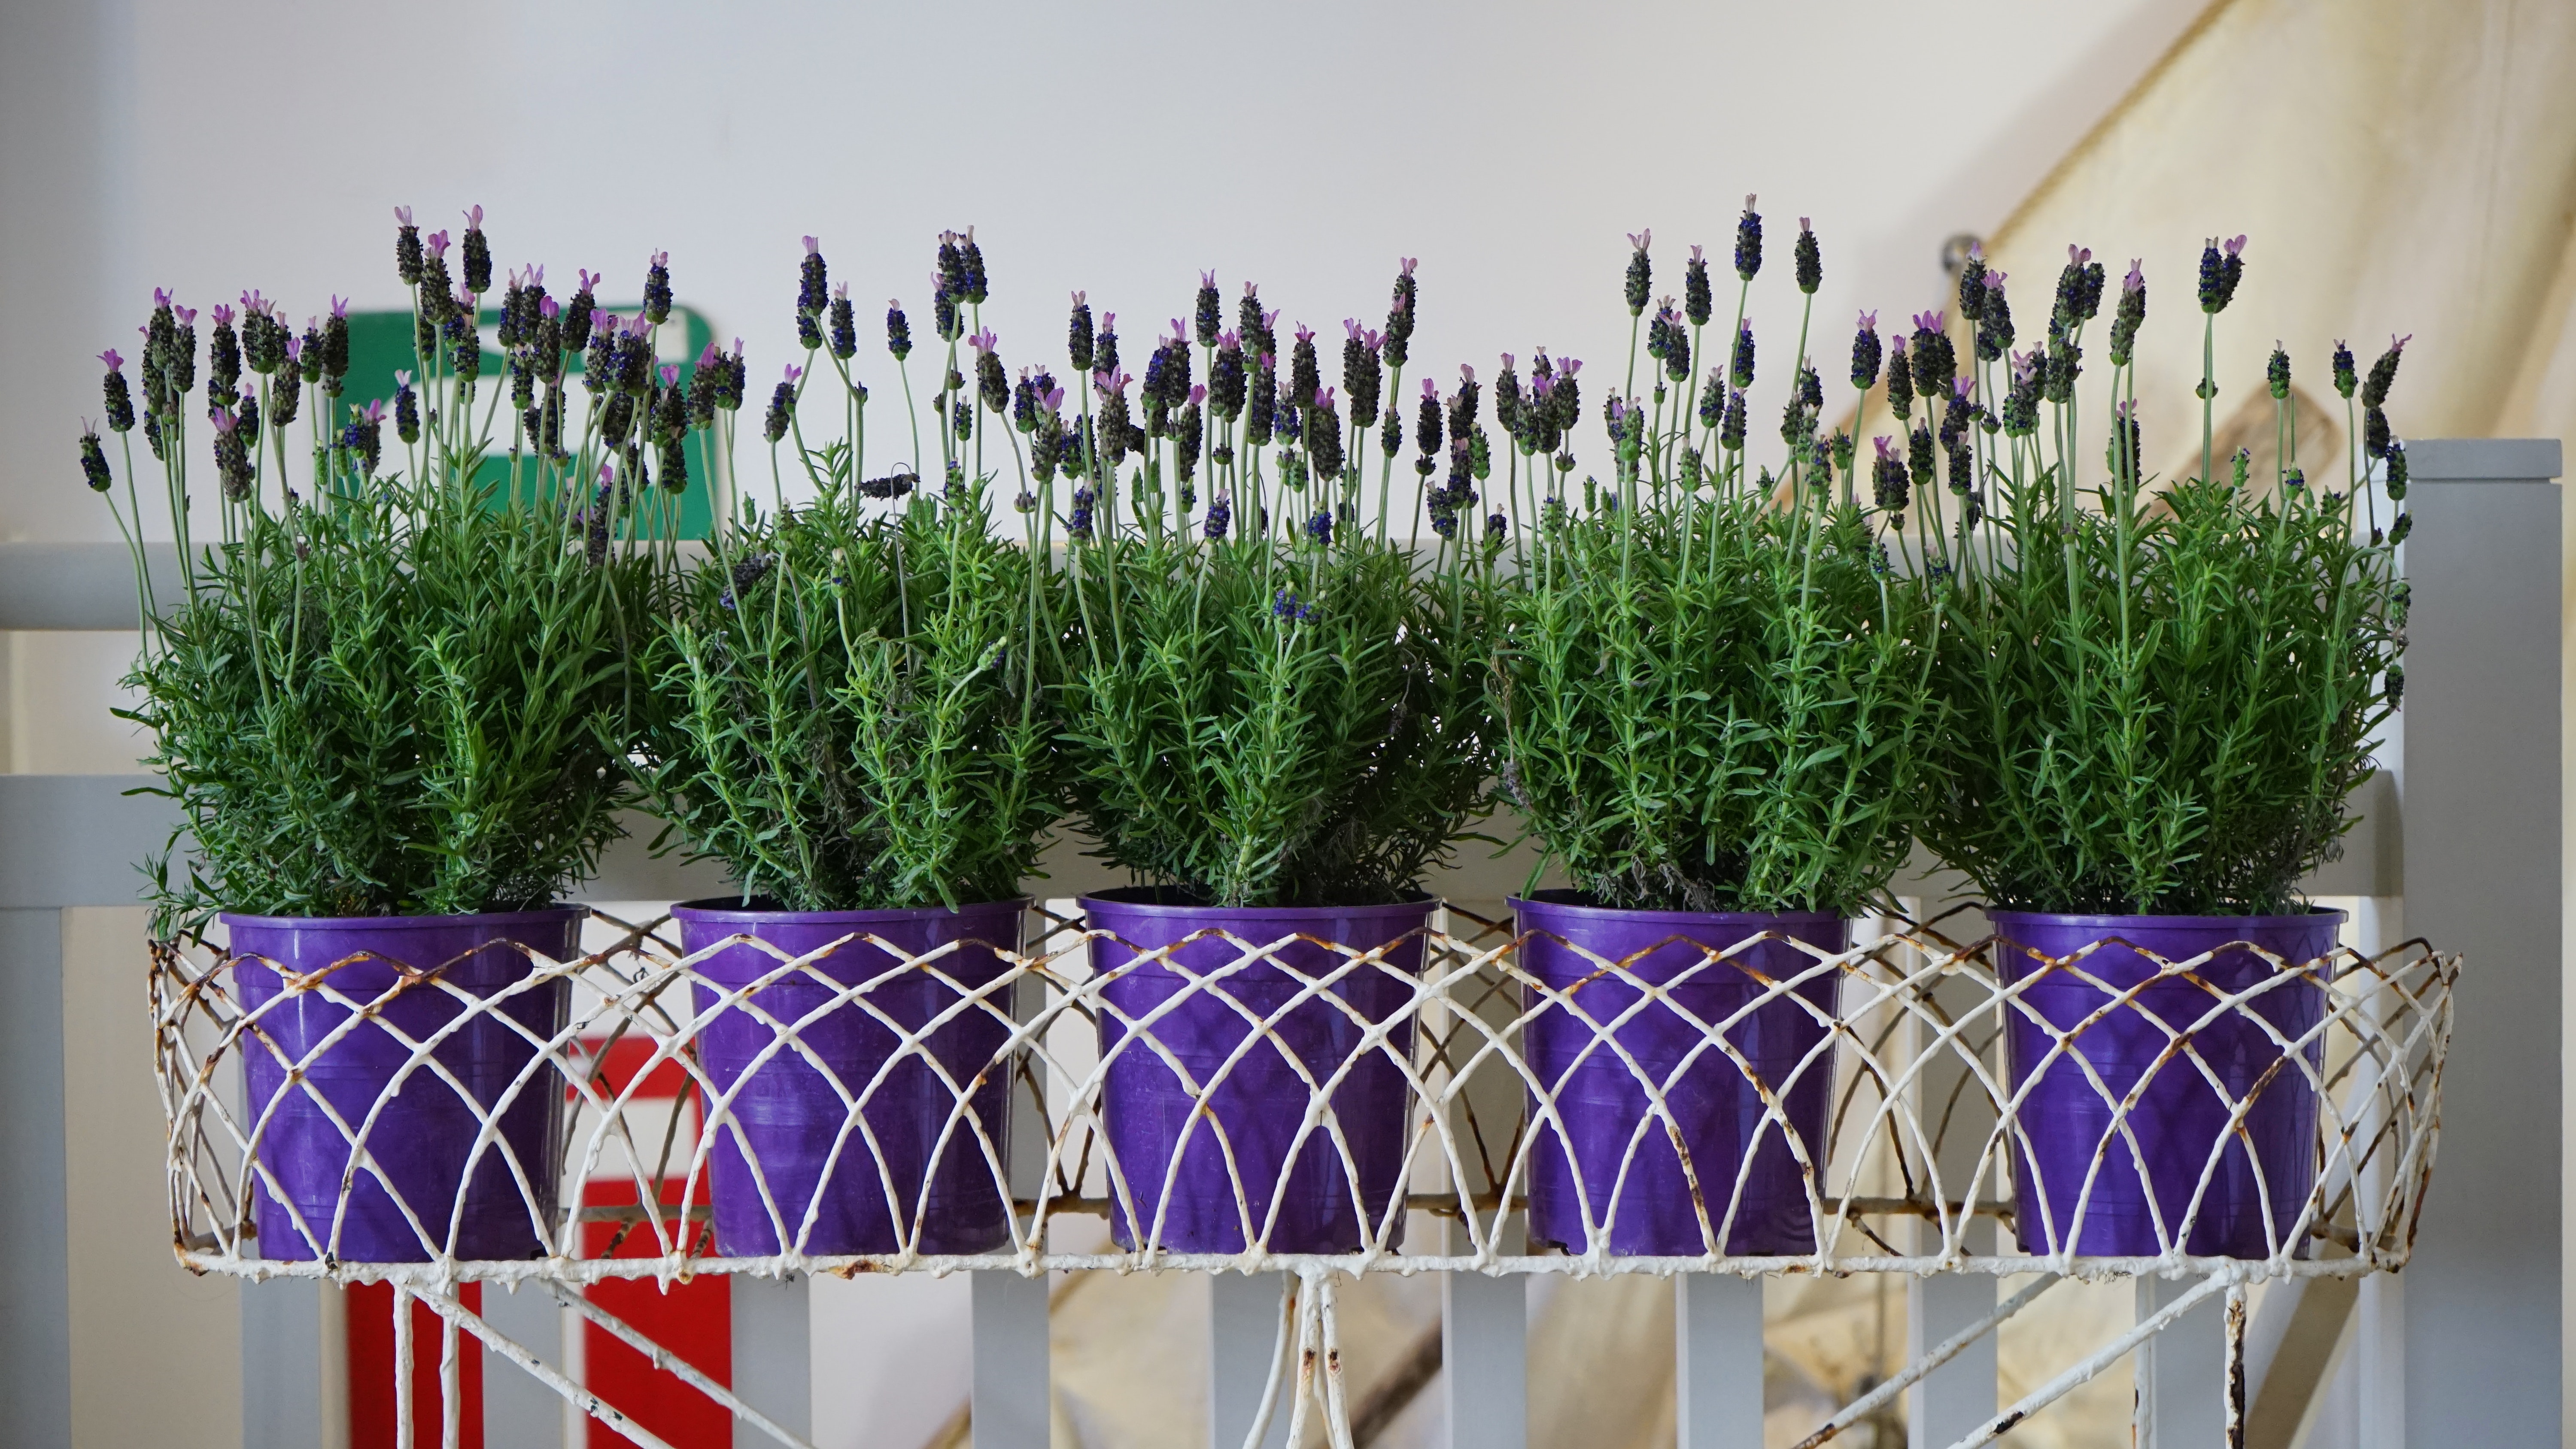 Five electric blue flower pots in an indoor setting with thick green foliage plants with small purple flower on a white horizontal iron stand, in front of a white and a strip of red background